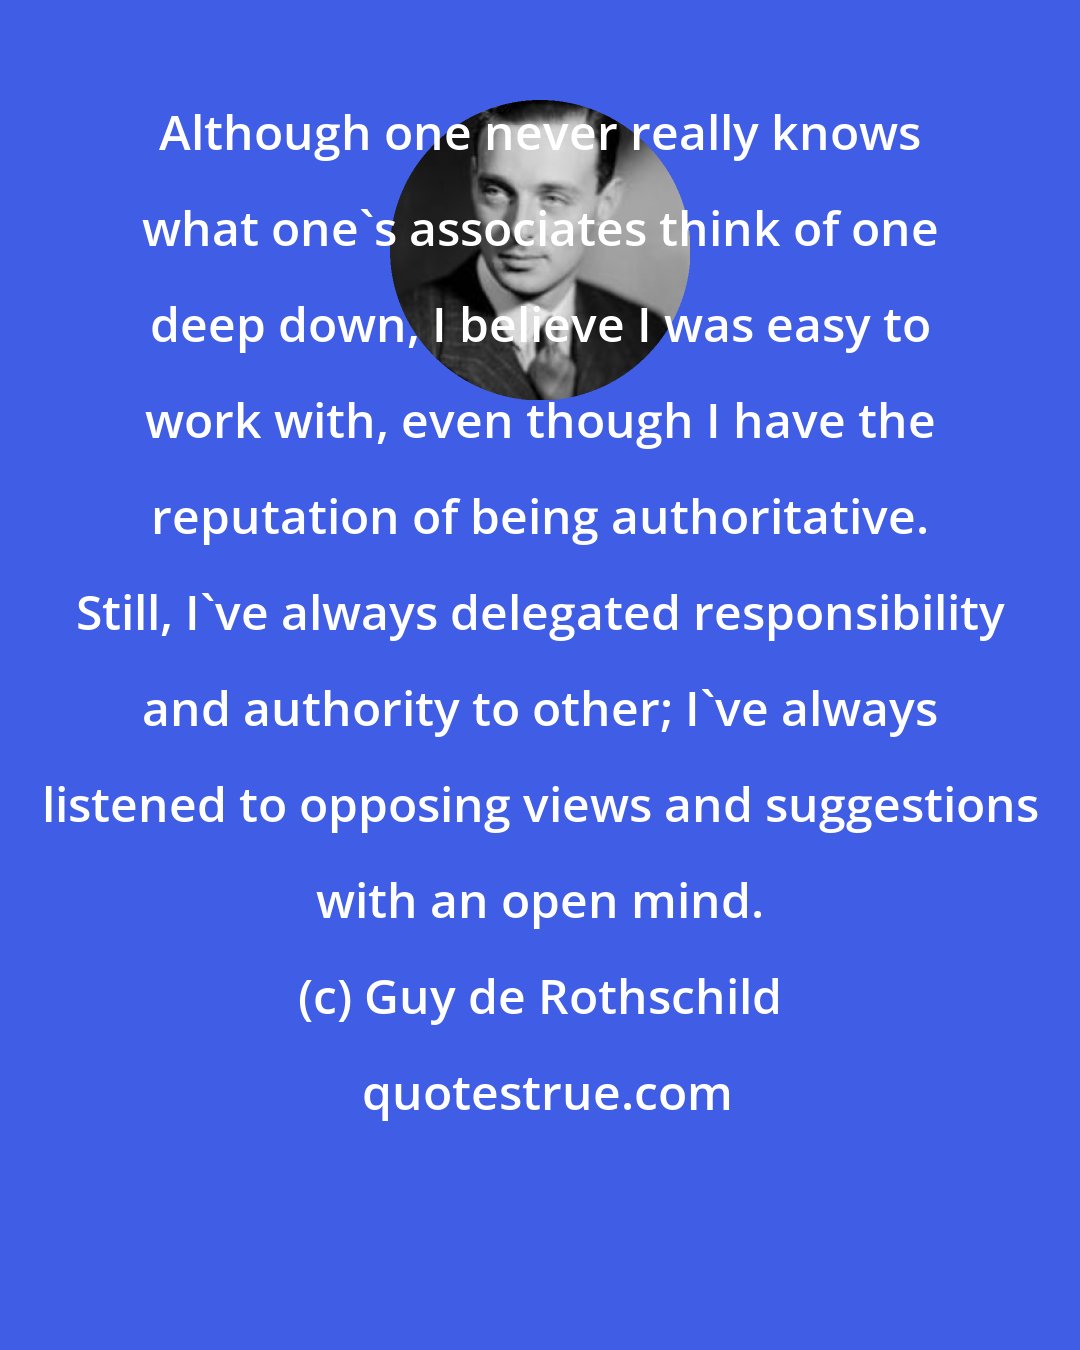 Guy de Rothschild: Although one never really knows what one's associates think of one deep down, I believe I was easy to work with, even though I have the reputation of being authoritative. Still, I've always delegated responsibility and authority to other; I've always listened to opposing views and suggestions with an open mind.